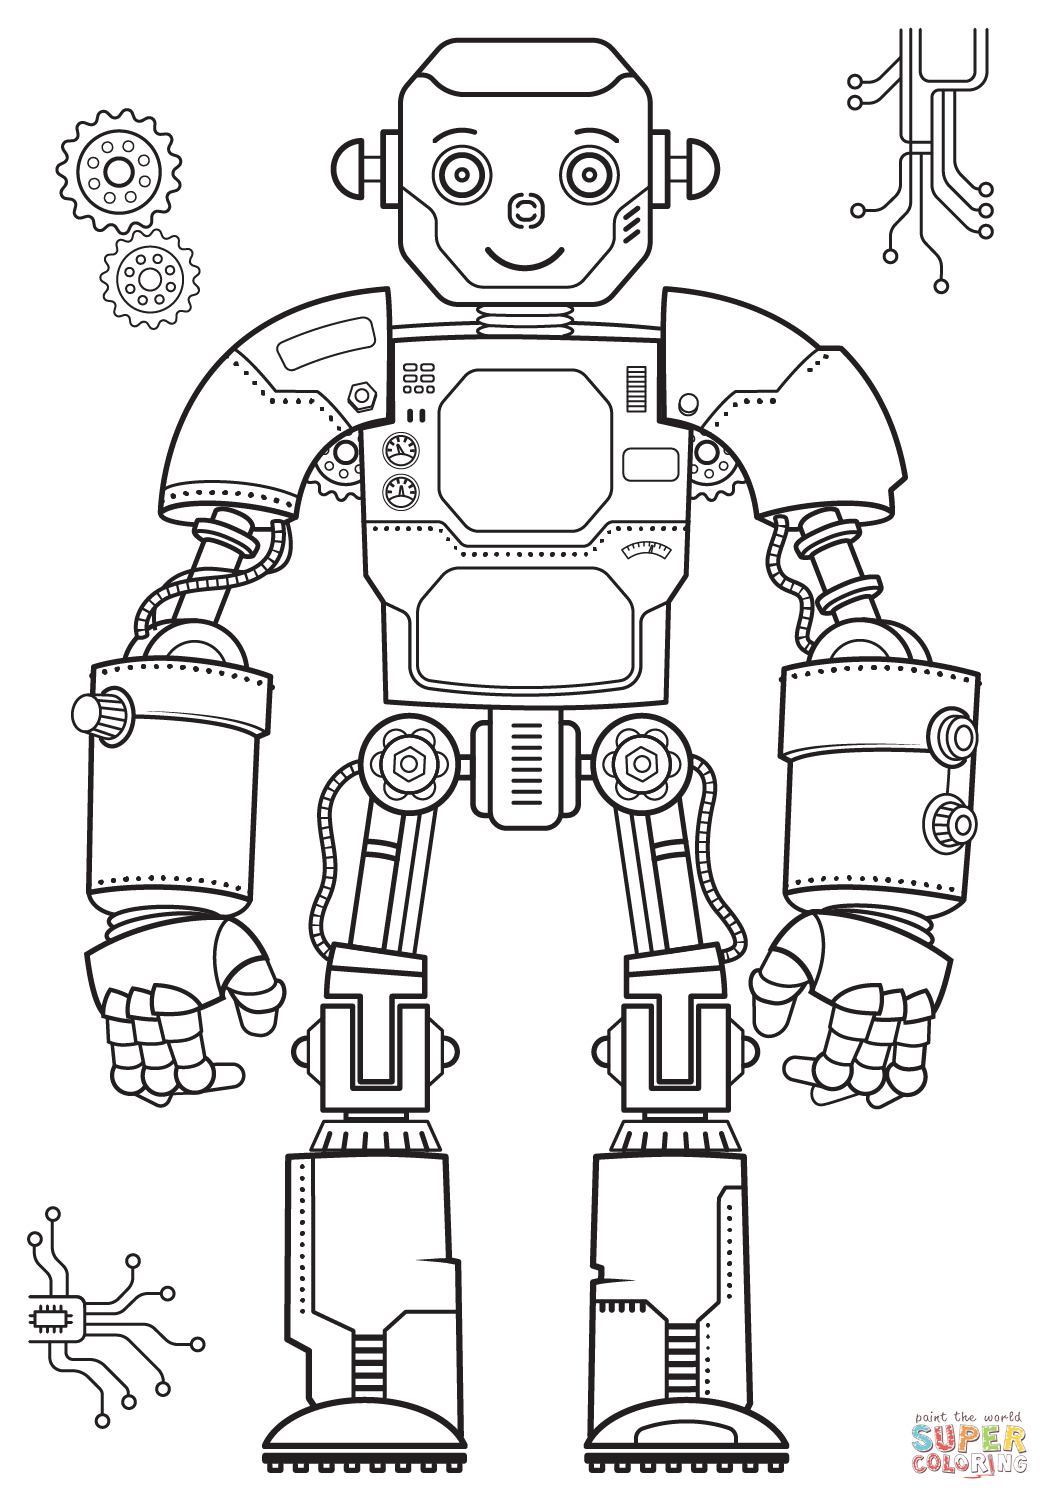 Robot coloring page free printable coloring pages